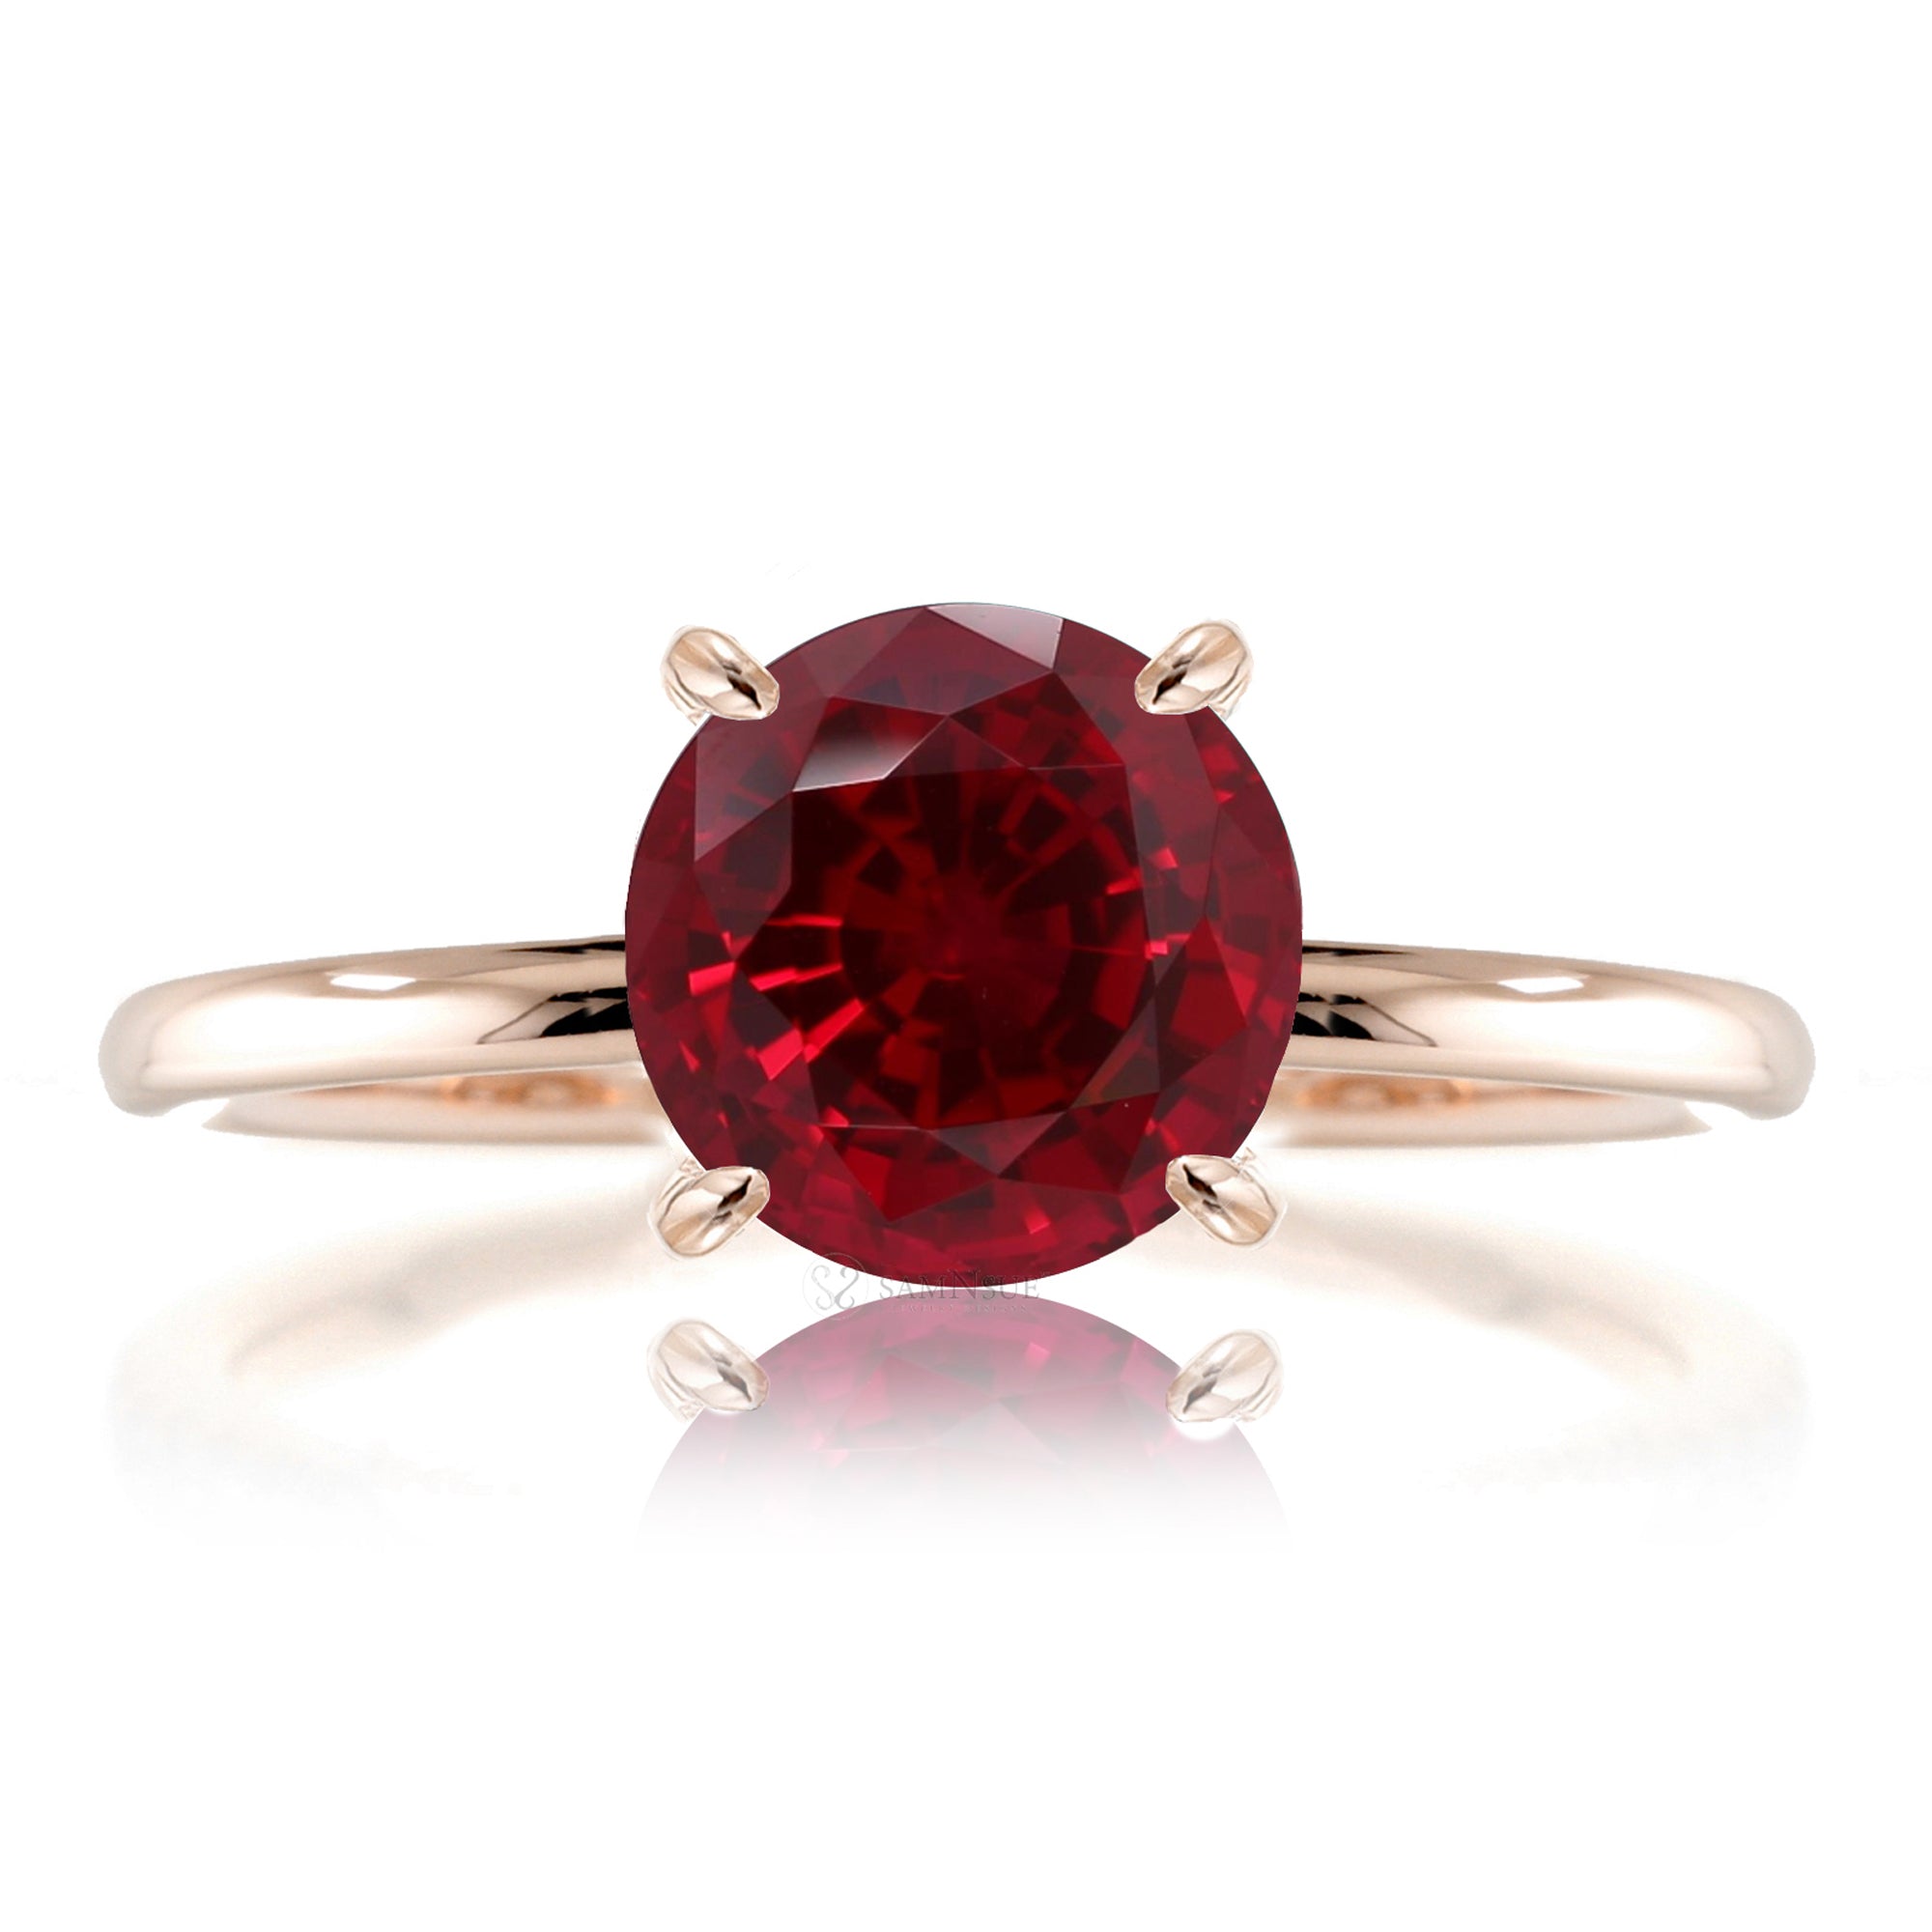 Round cut lab ruby engagement ring solid band rose gold - the Ava